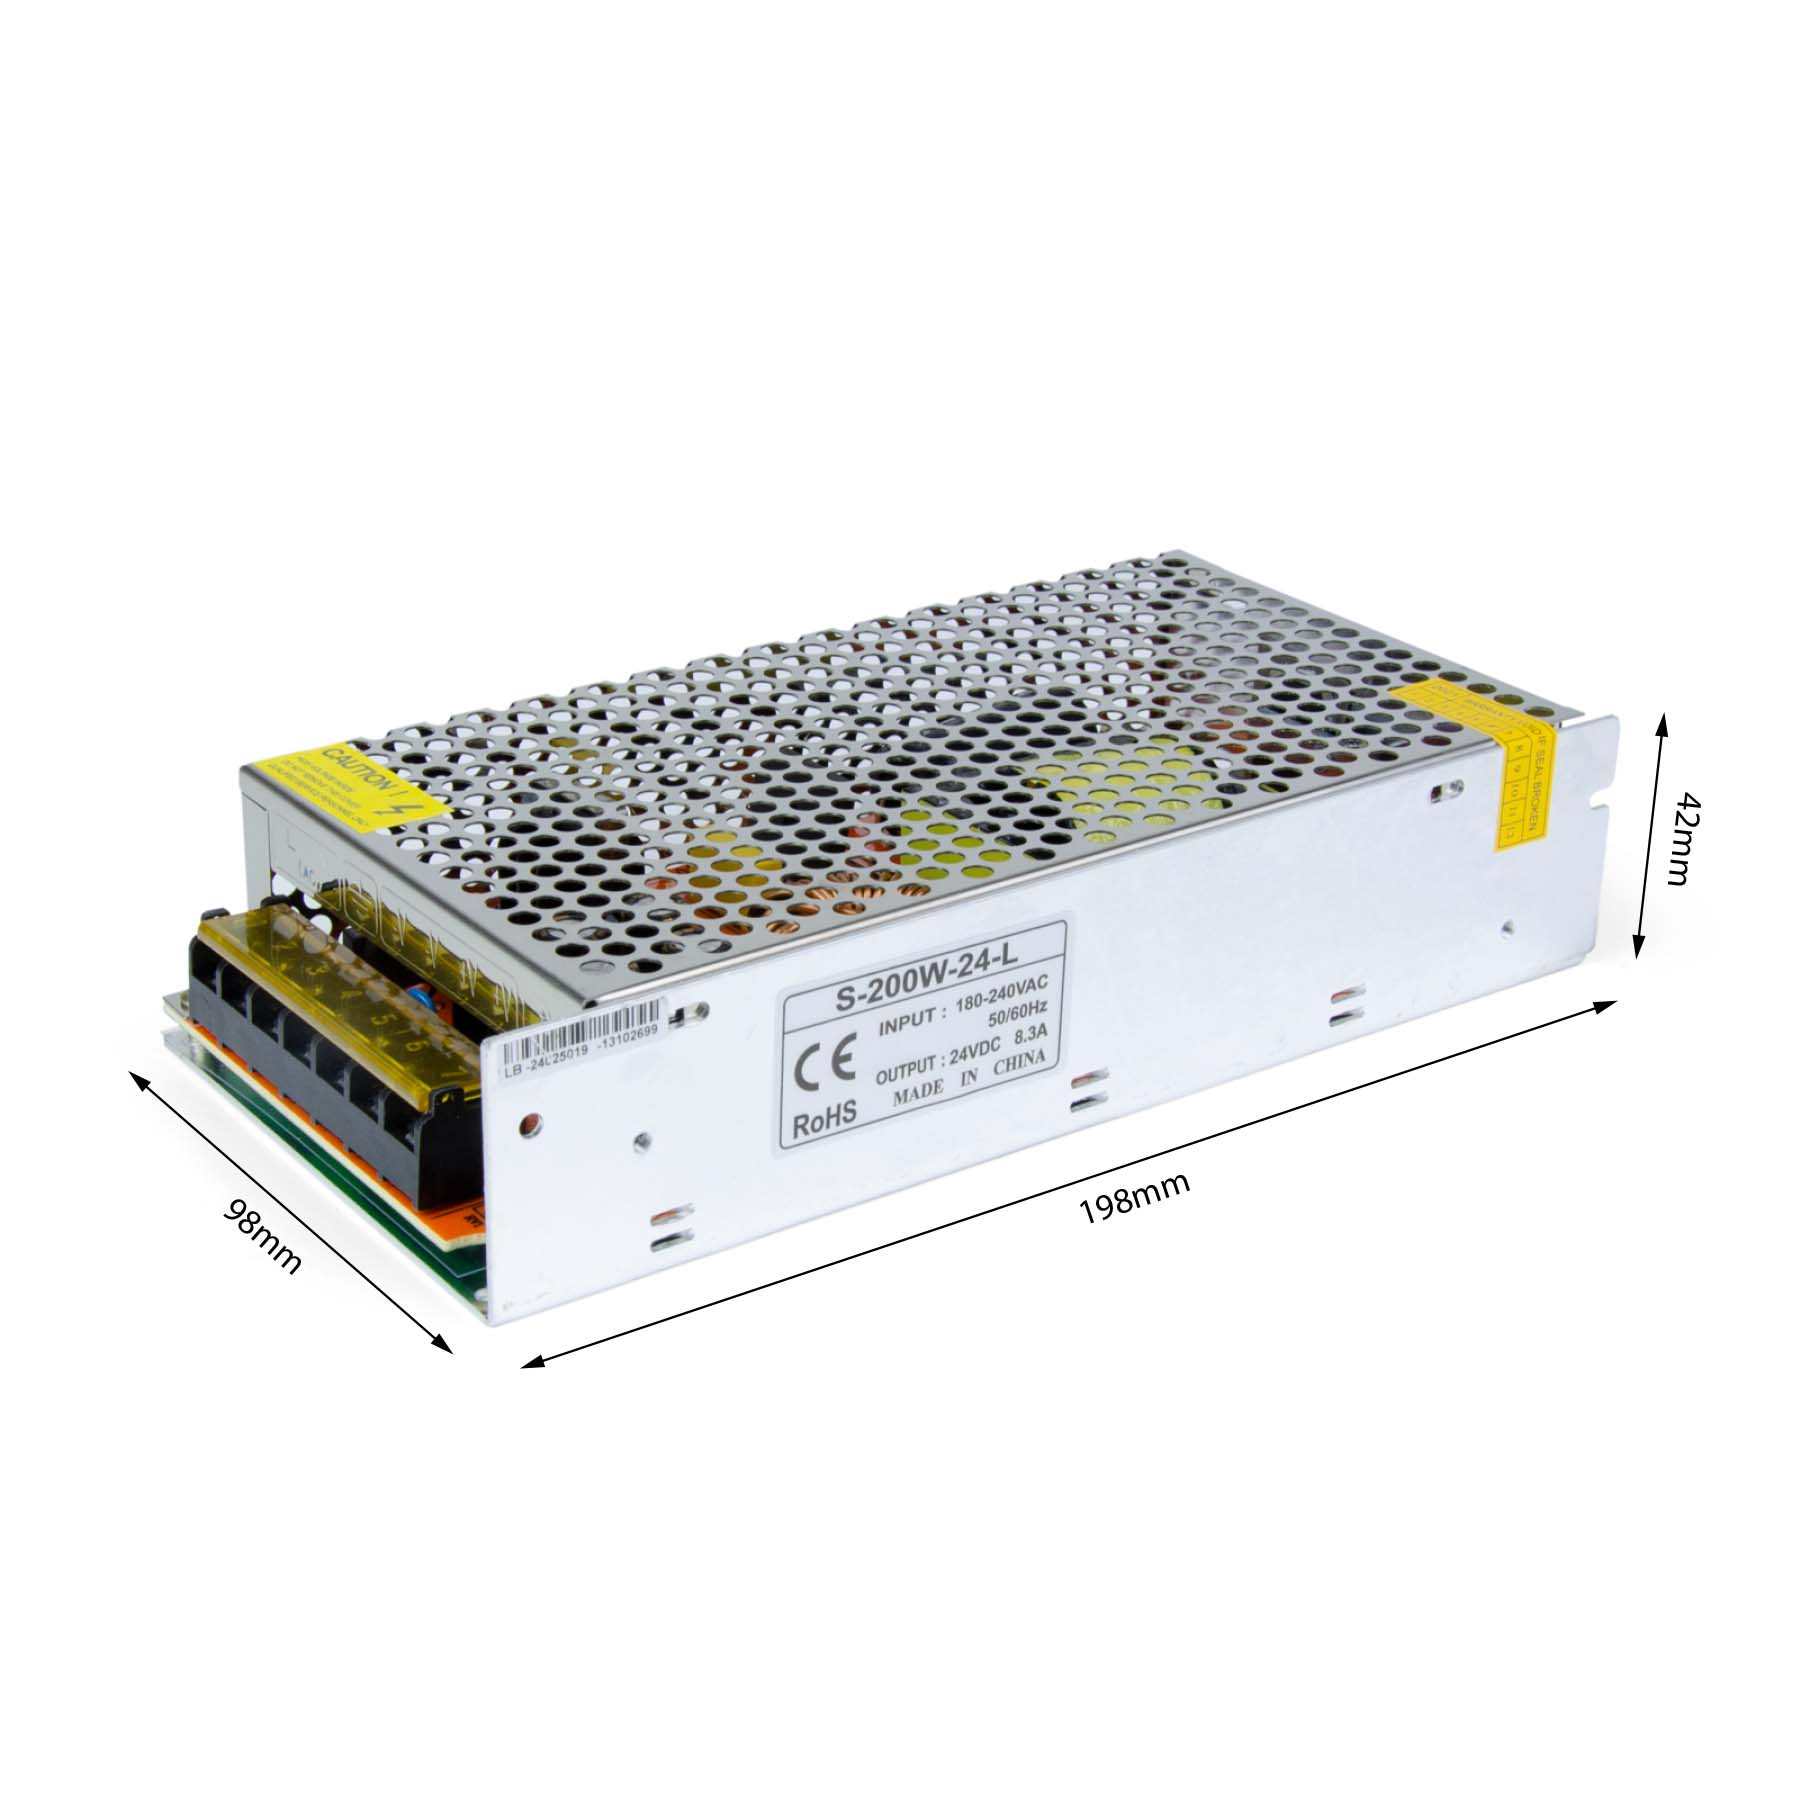 G.W.S LED Wholesale LED Drivers/LED Power Supplies IP20 (Non-Waterproof) / 24V / 200W 24V 8.3A 200W LED Driver